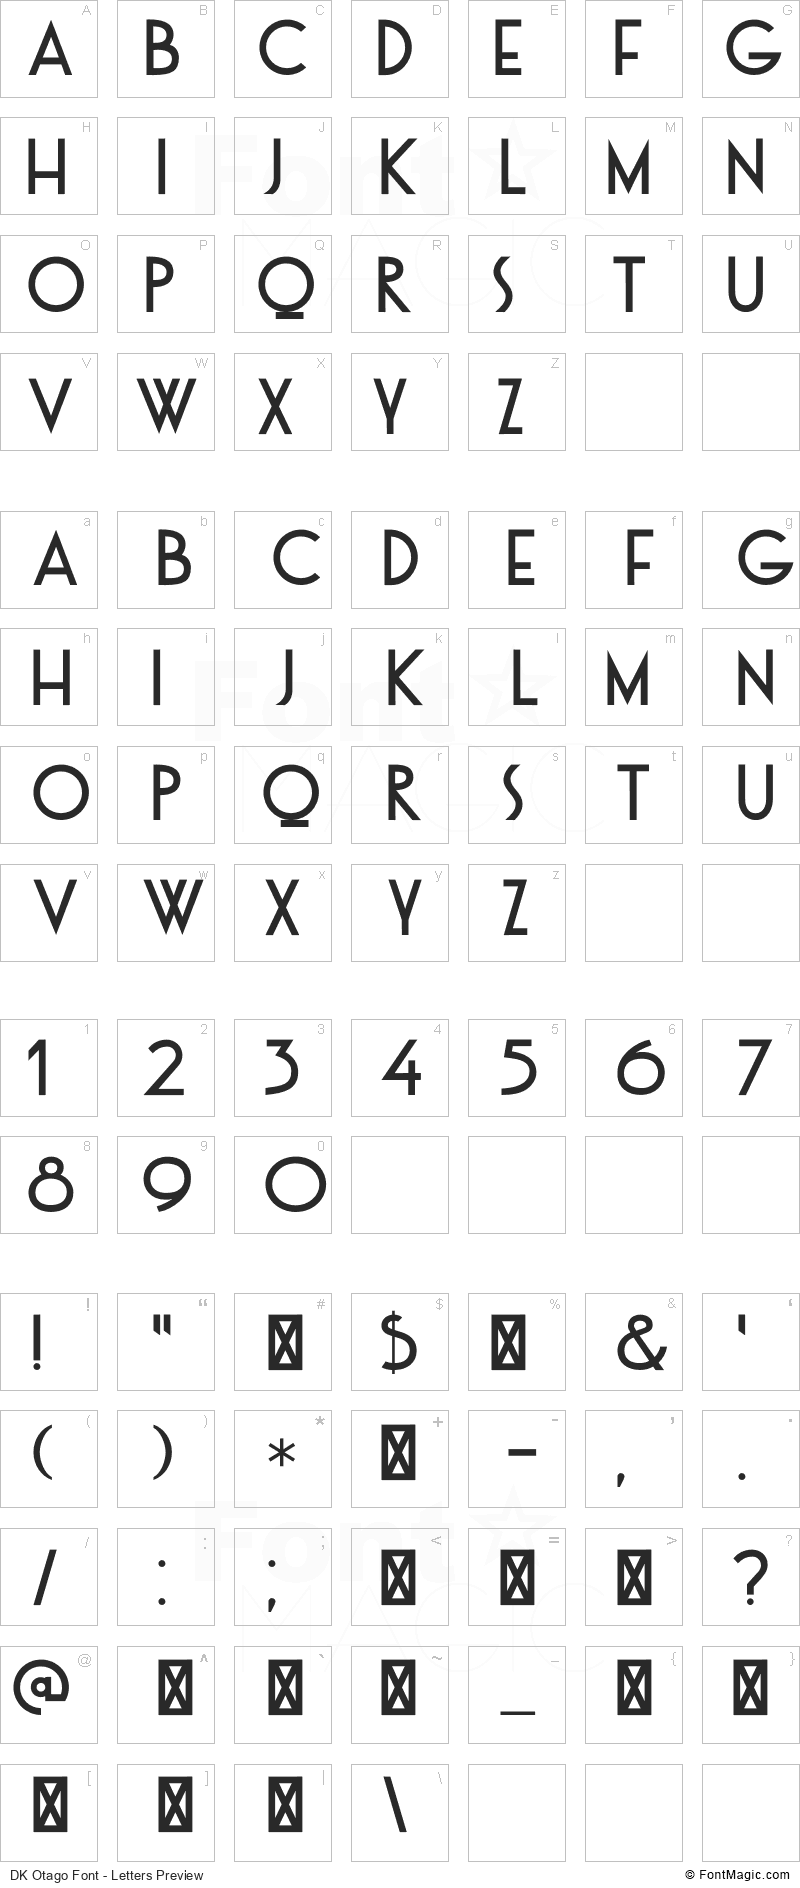 DK Otago Font - All Latters Preview Chart